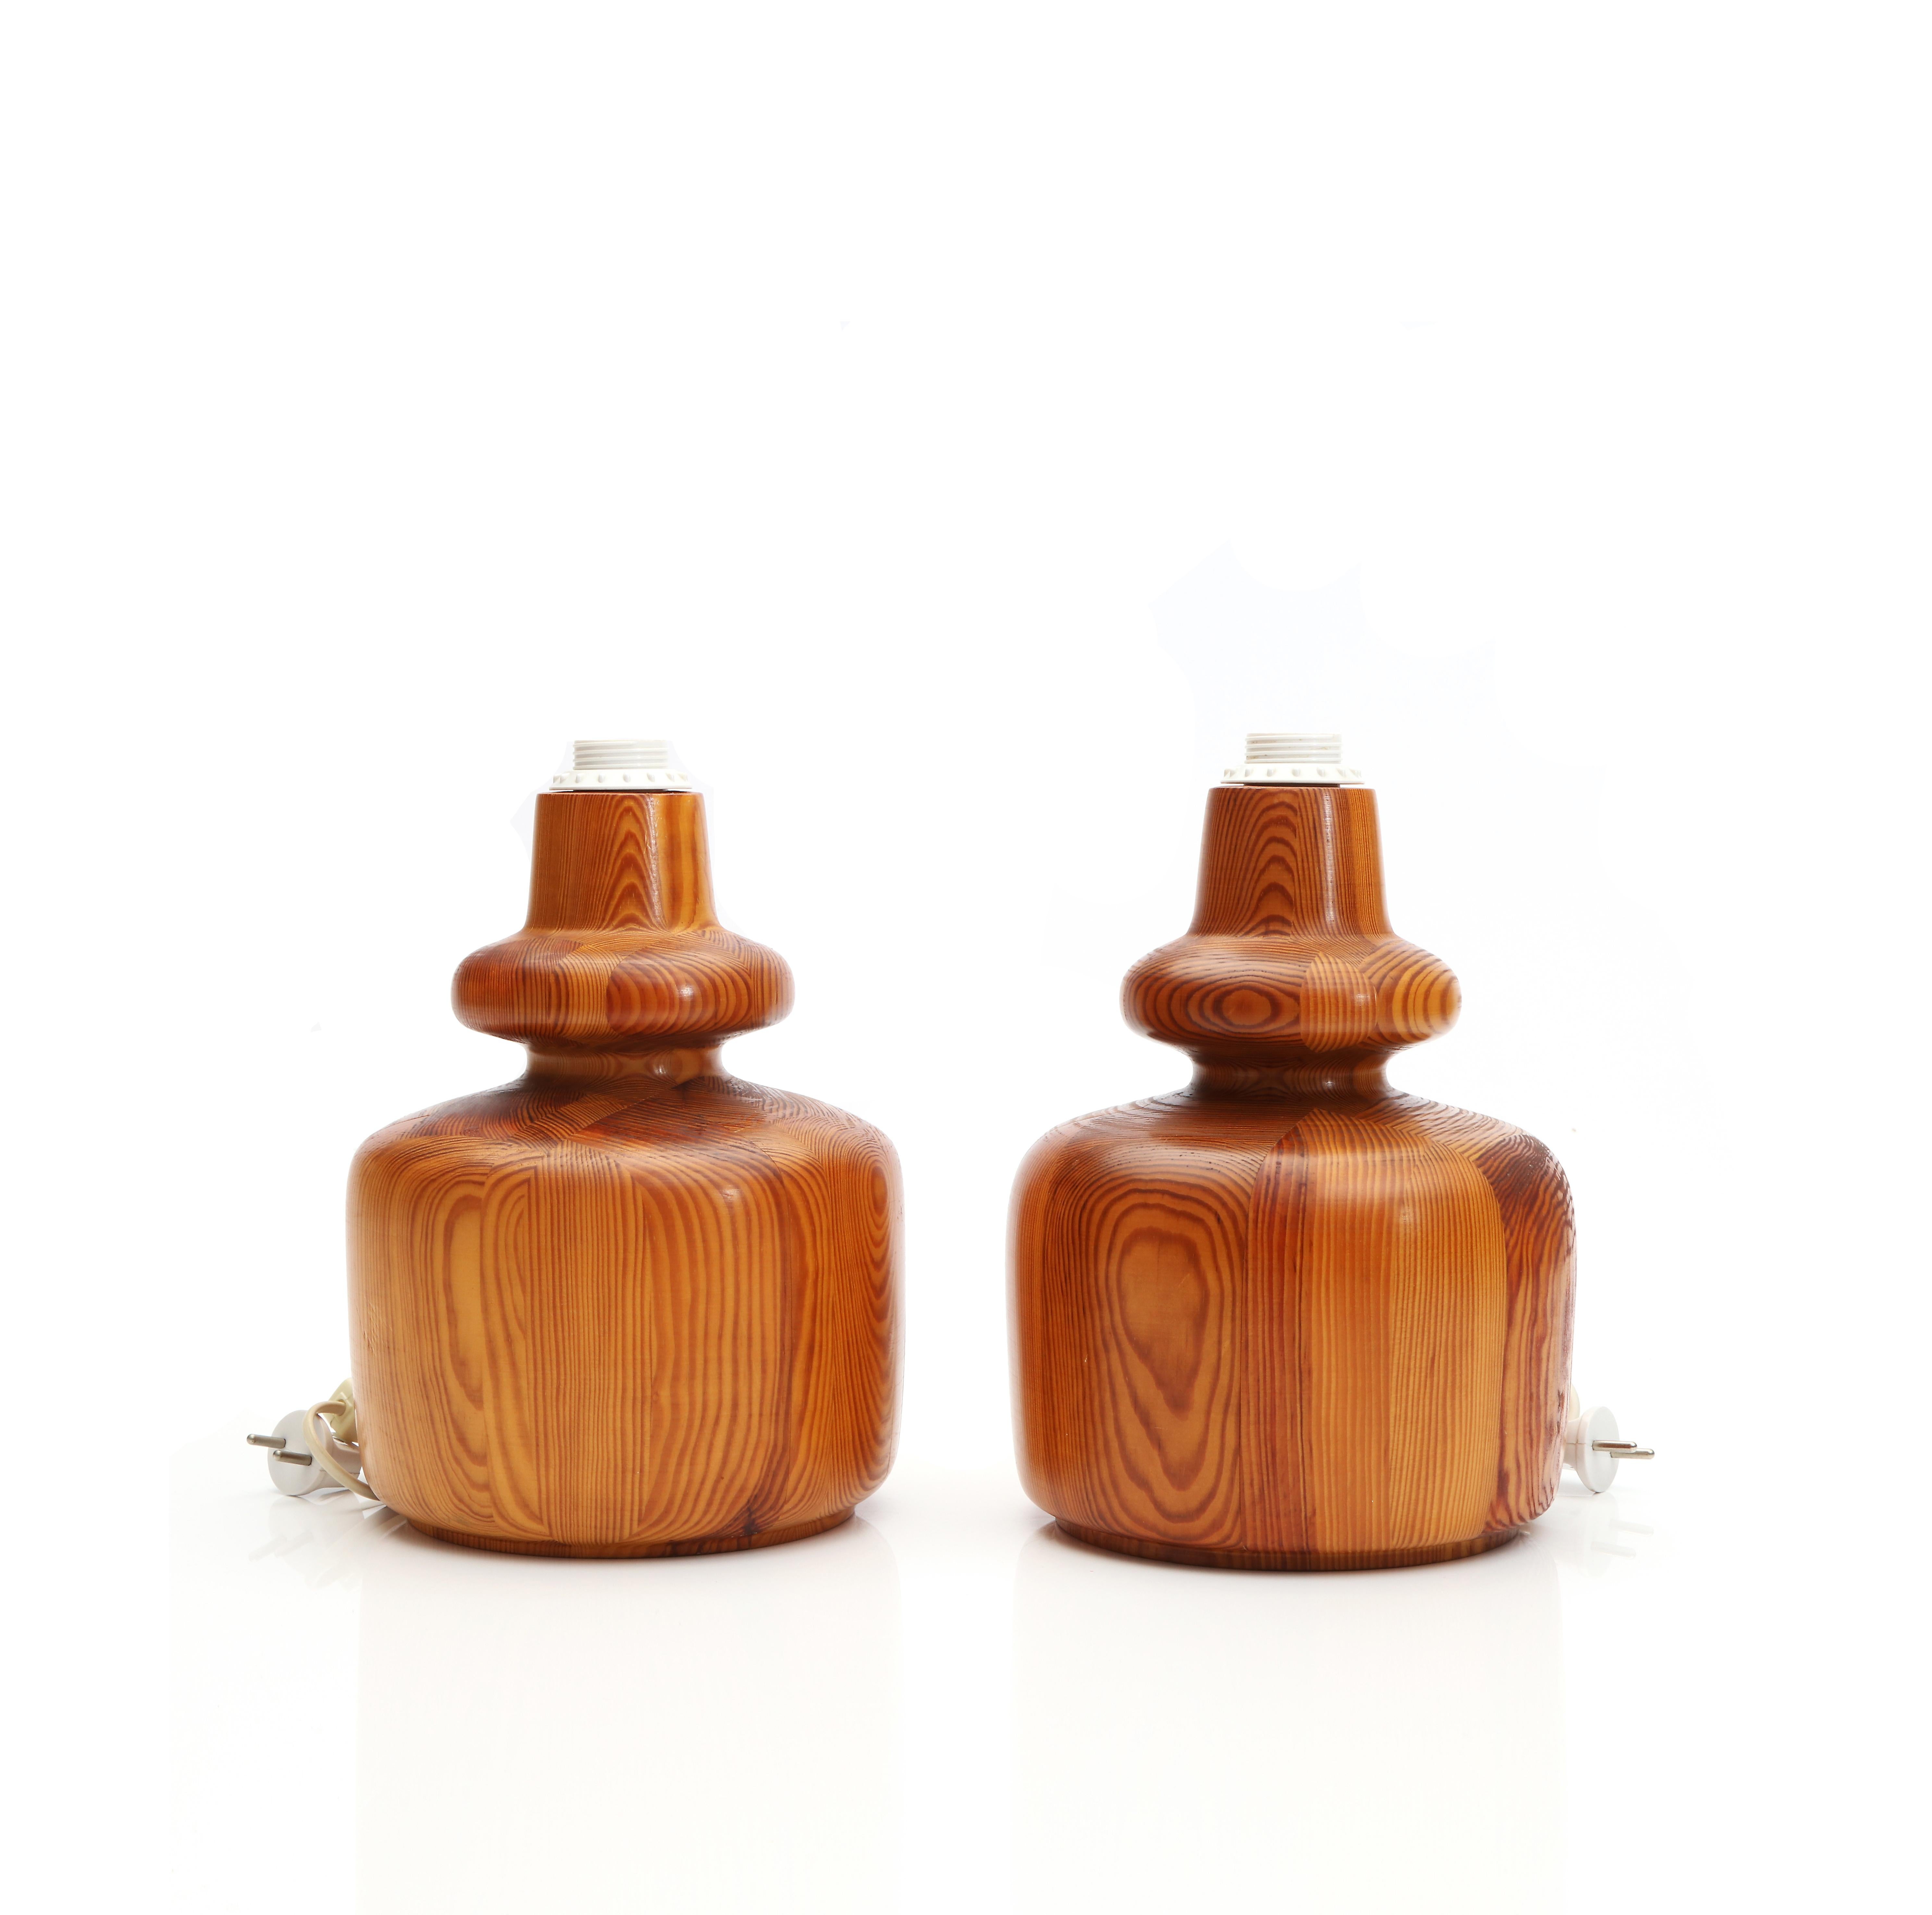 A Pair of designed table lamps in solid pine made in Denmark, 1970s.
Illuminate Your Space with Timeless Craftsmanship 
Indulge in the warmth of tradition and the glow of exquisite craftsmanship with our Danish Pine Table Lamps, handcrafted by a